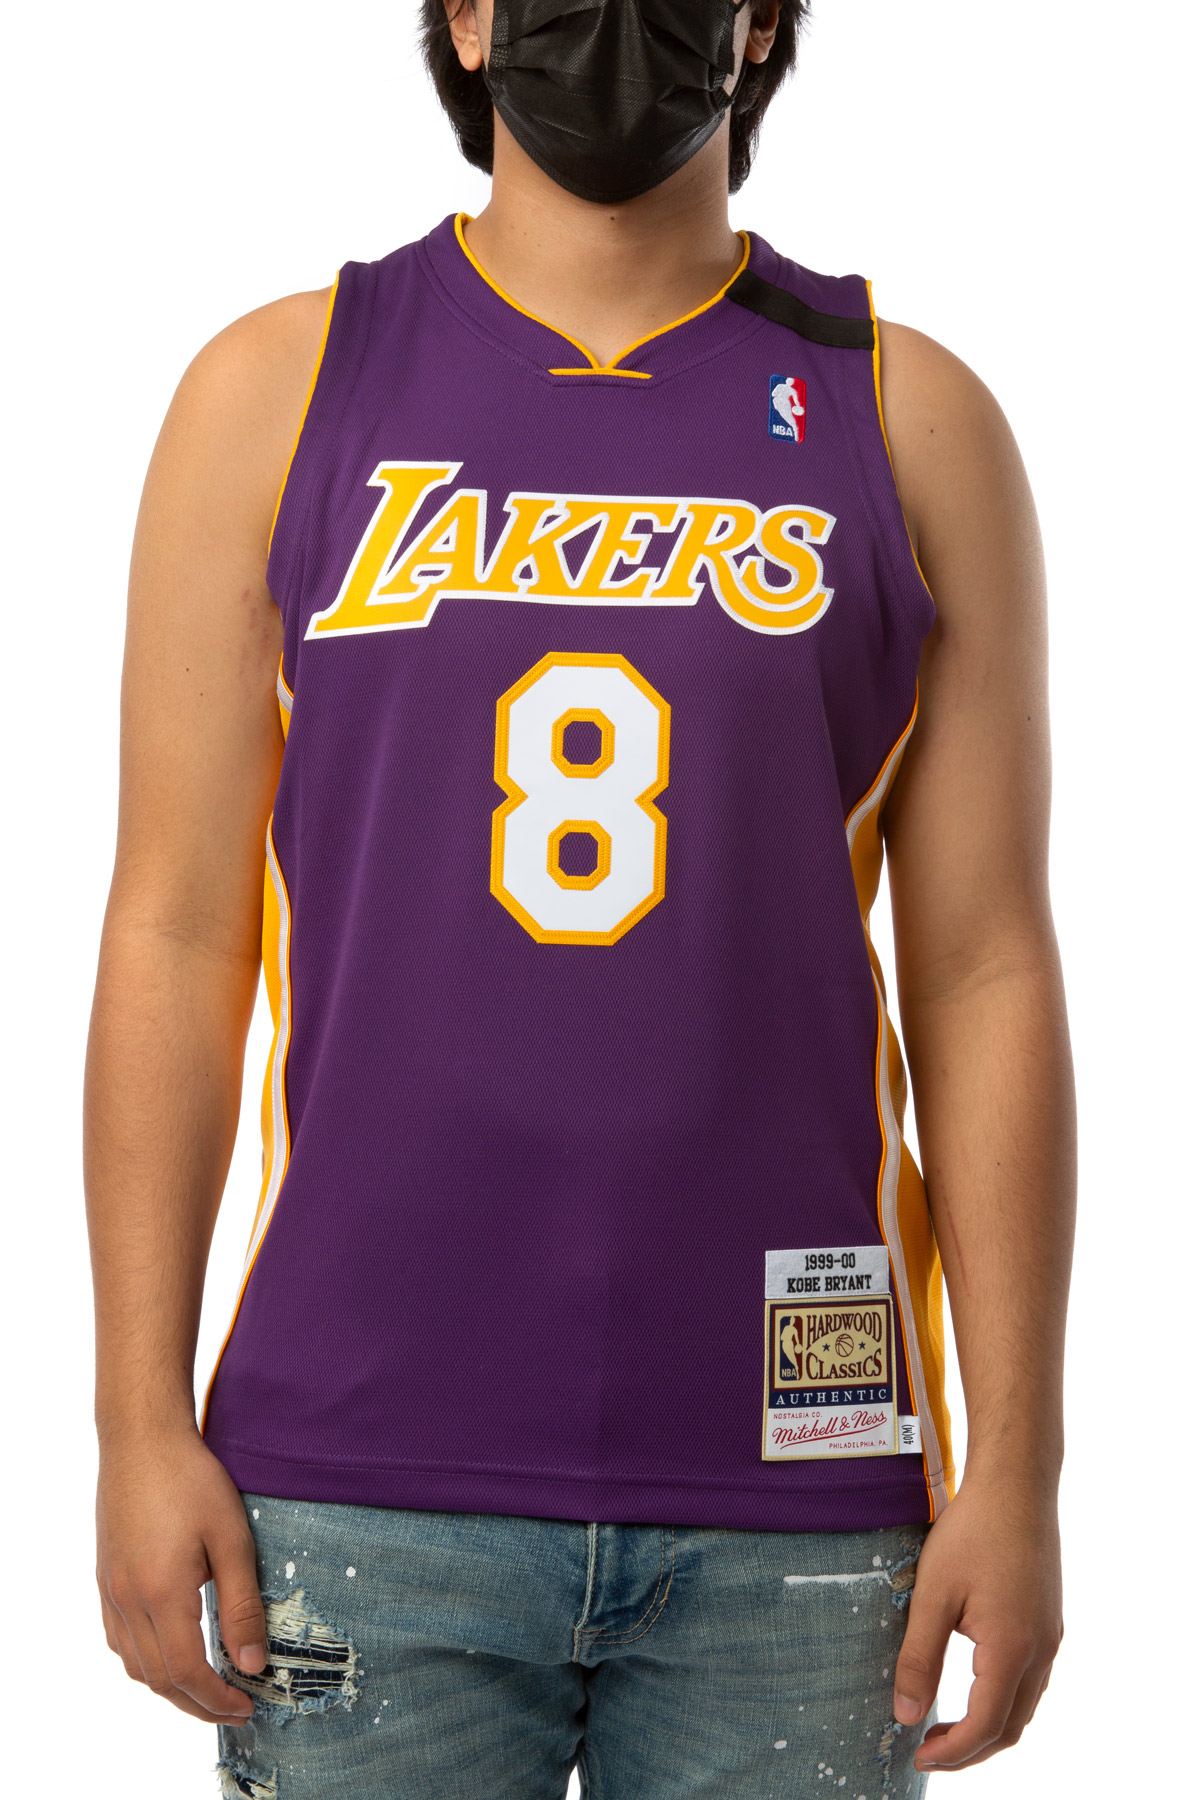 LOS ANGELES LAKERS KOBE BRYANT 1999-00 AUTHENTIC JERSEY